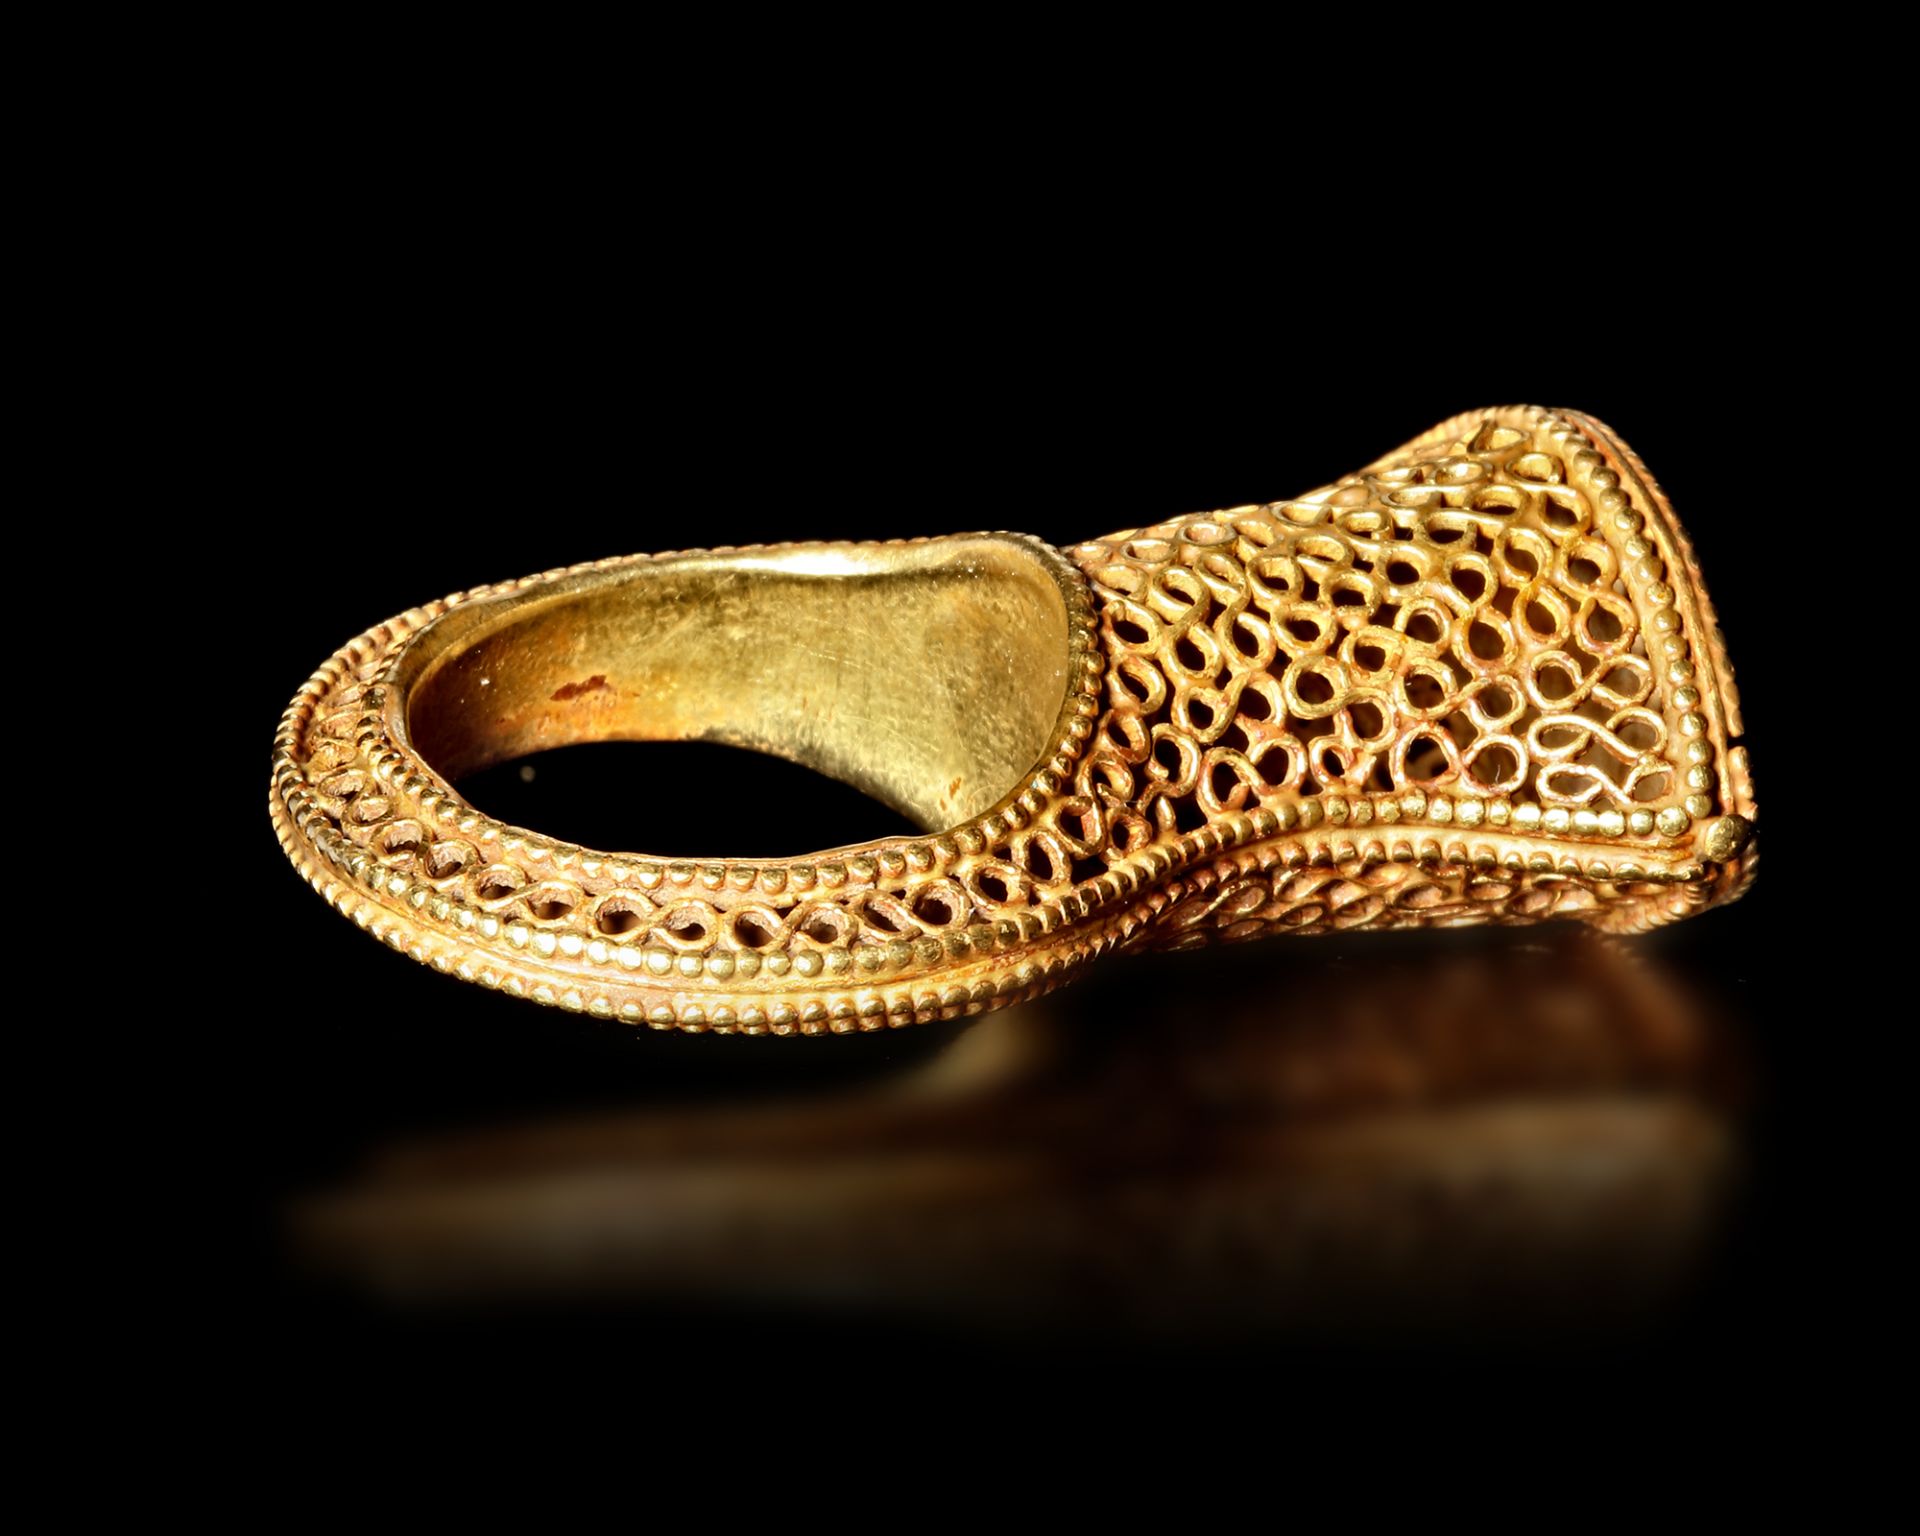 A MAGNIFICENT EARLY ISLAMIC GOLD RING, NEAR EAST 10TH-11TH CENTURY - Image 4 of 4